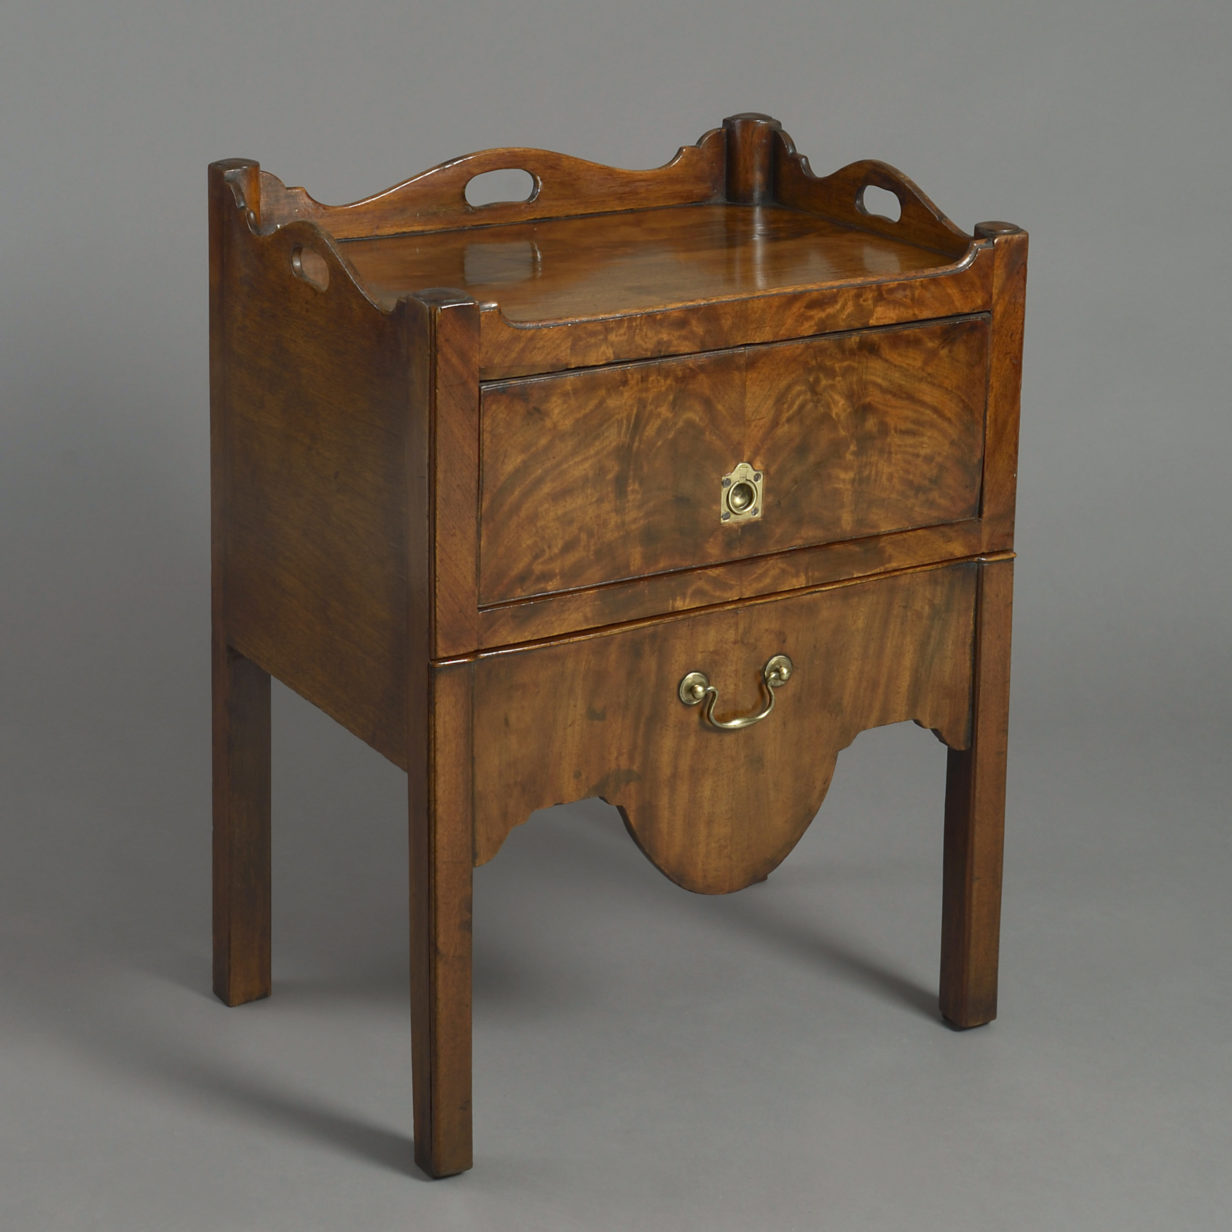 An 18th century pair of mahogany bedside cabinets